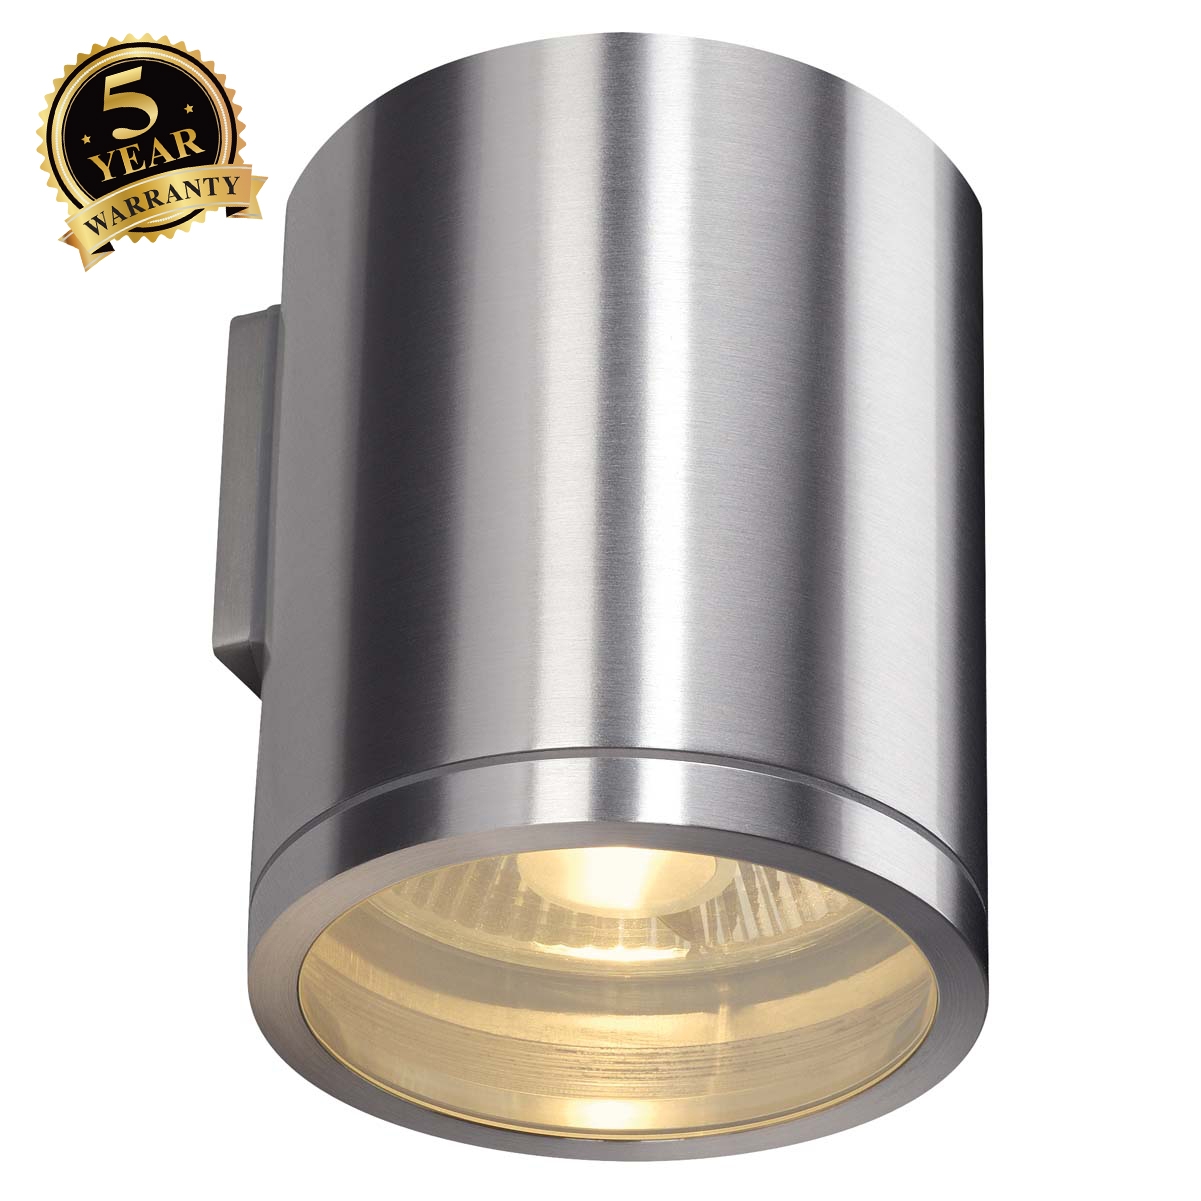 SLV ROX WALL OUT wall light, round, alu brushed, ES111, max.75W 229766